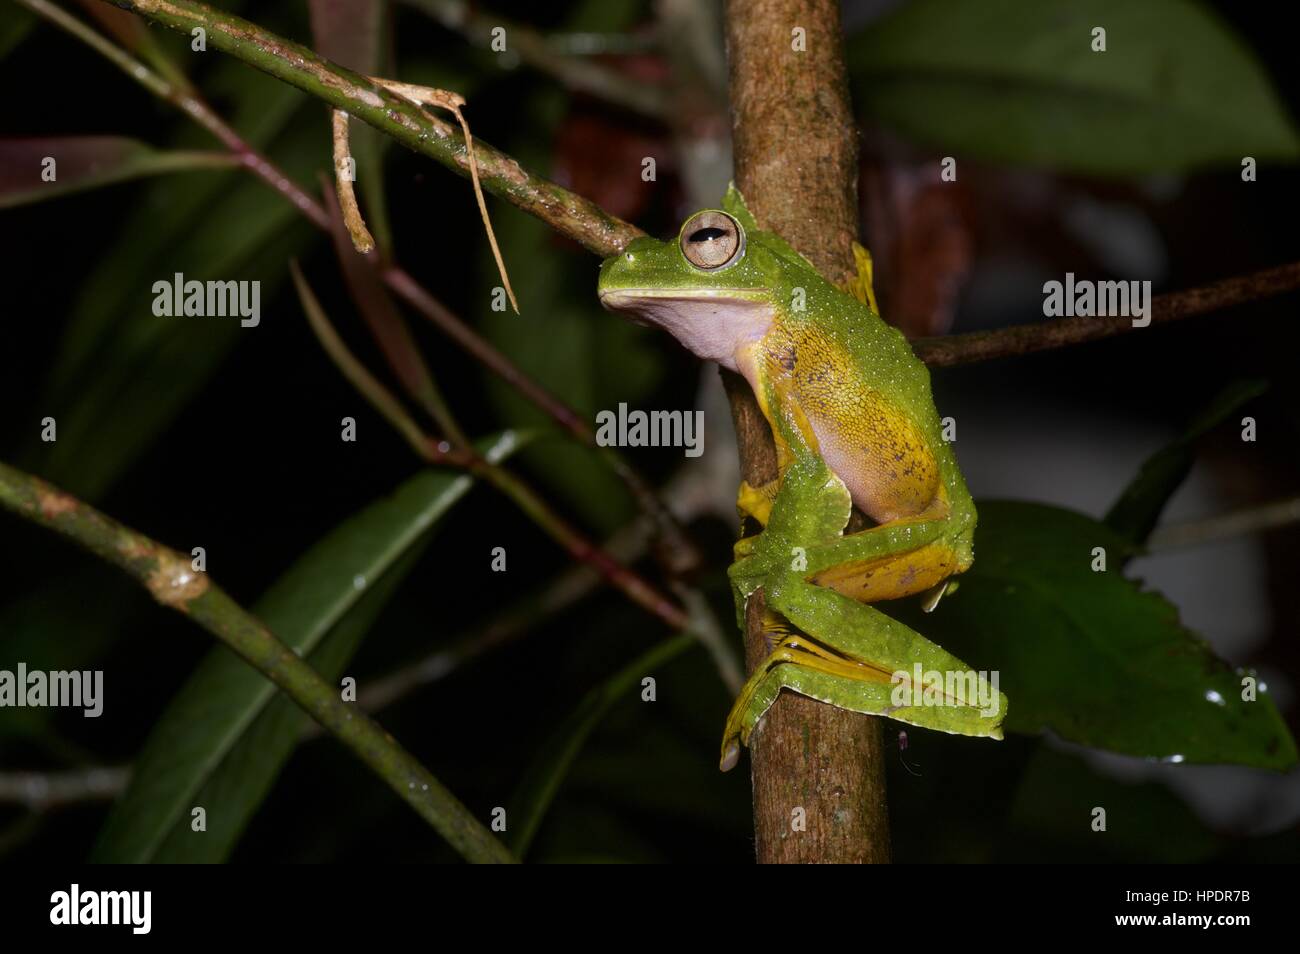 A Wallace's Flying Frog (Rhacophorus nigropalmatus) in the Malaysian rainforest at night Stock Photo